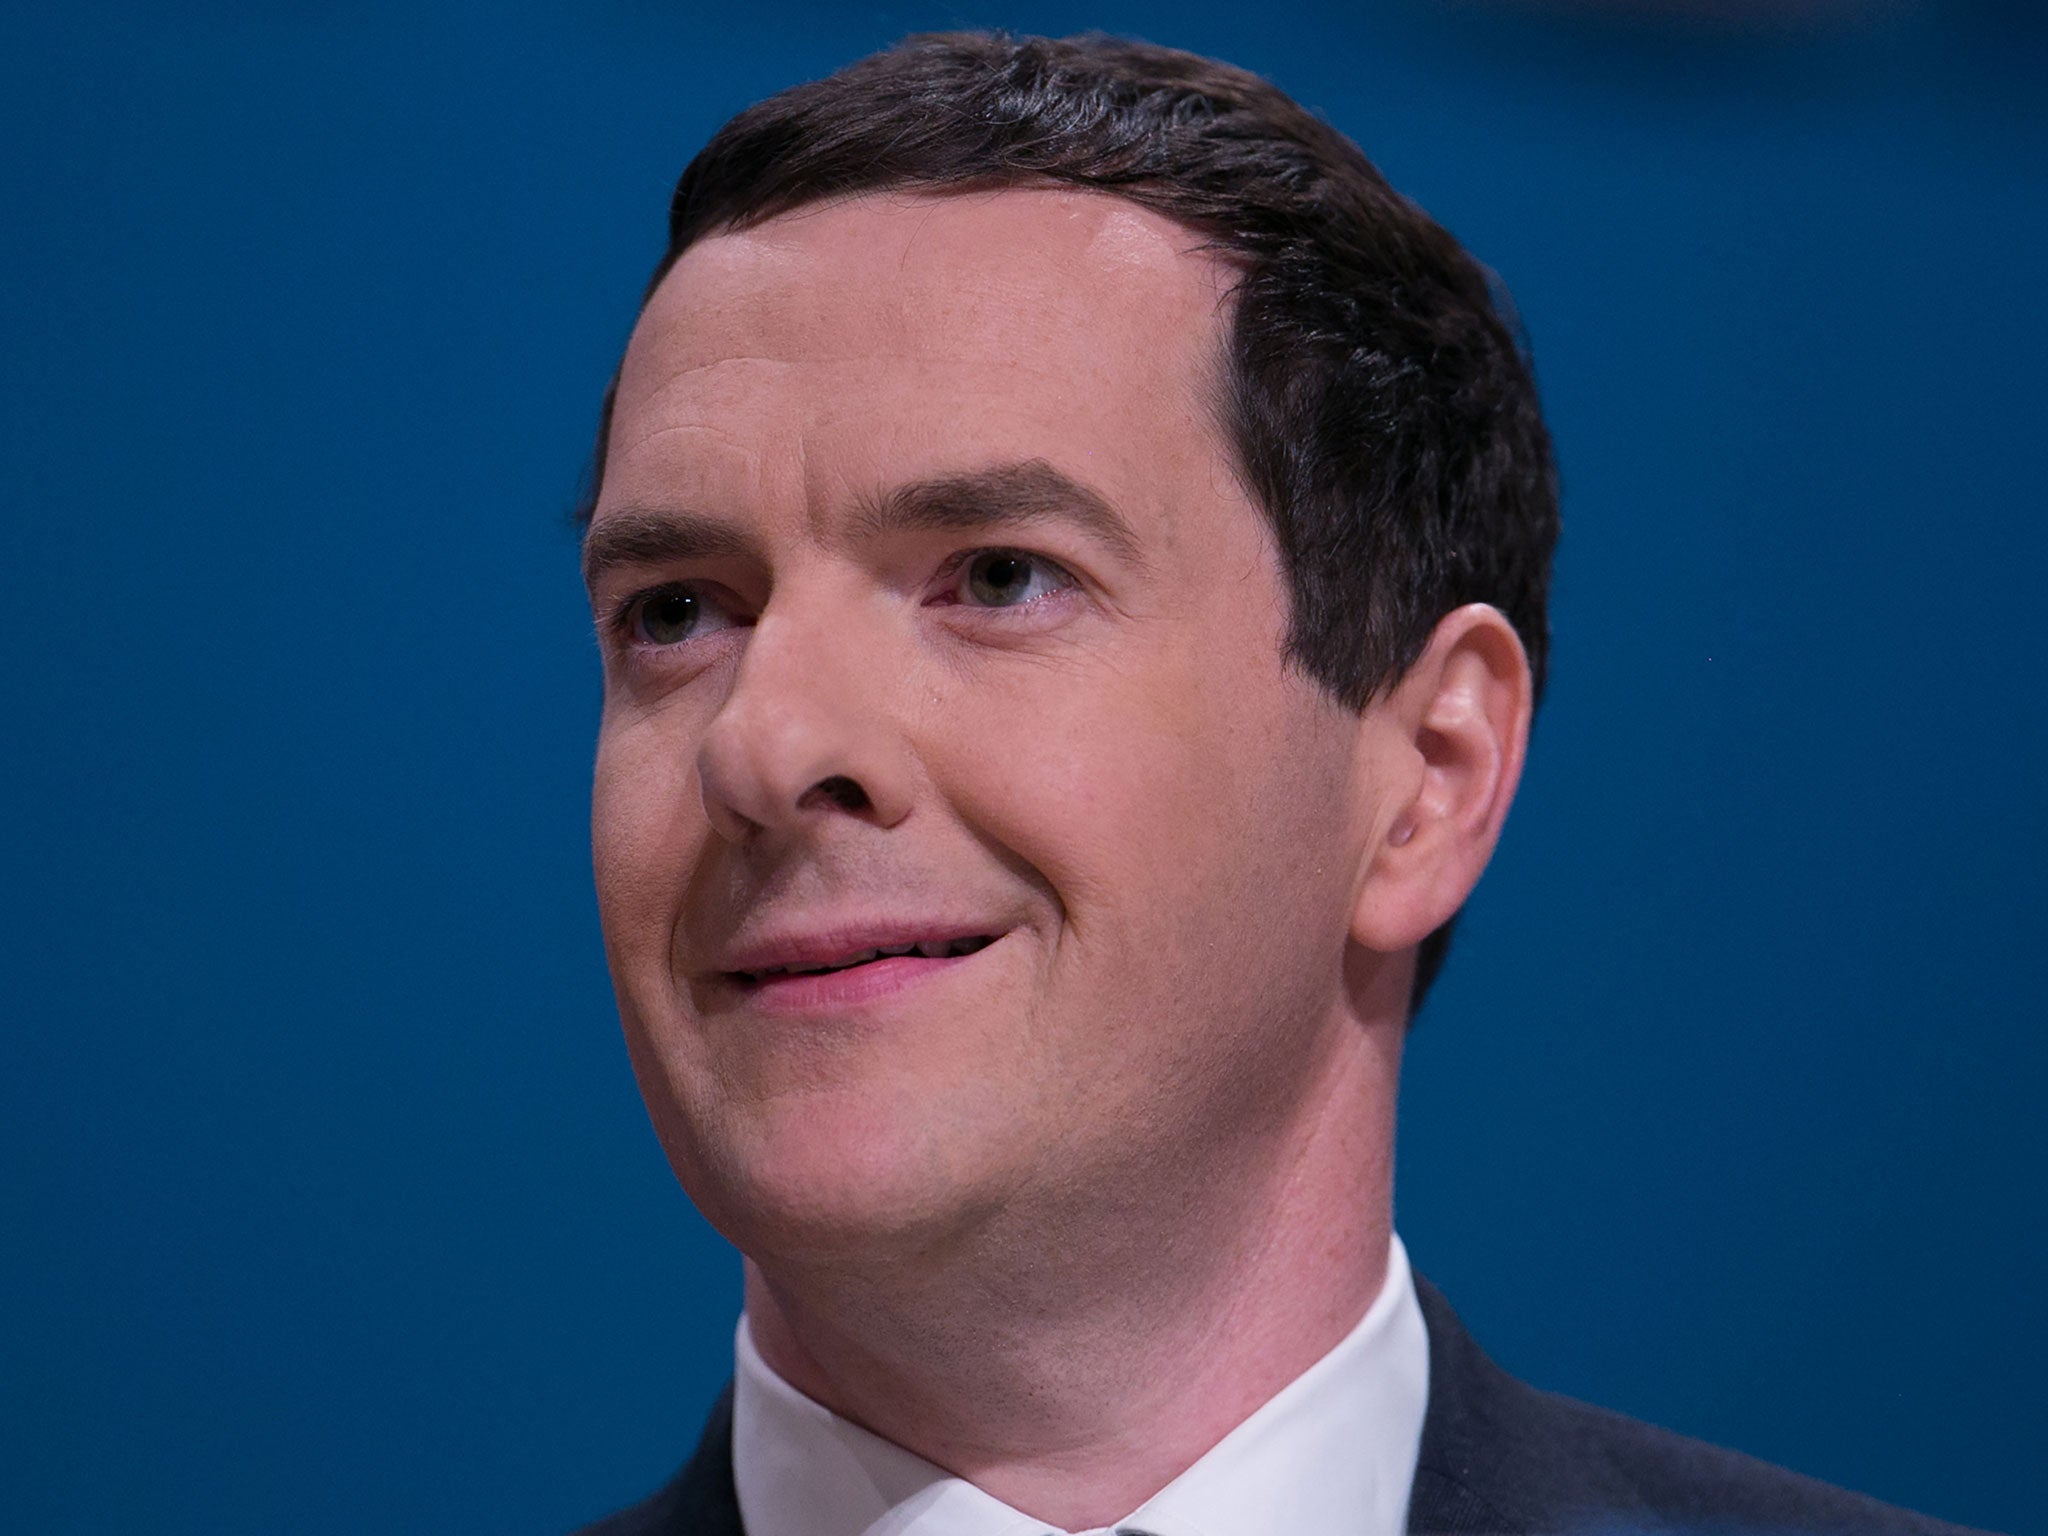 Chancellor of the Exchequer George Osborne addresses the Conservative party conference on September 29, 2014 in Birmingham, England. The second day of conference is set to be dominated by the economy.